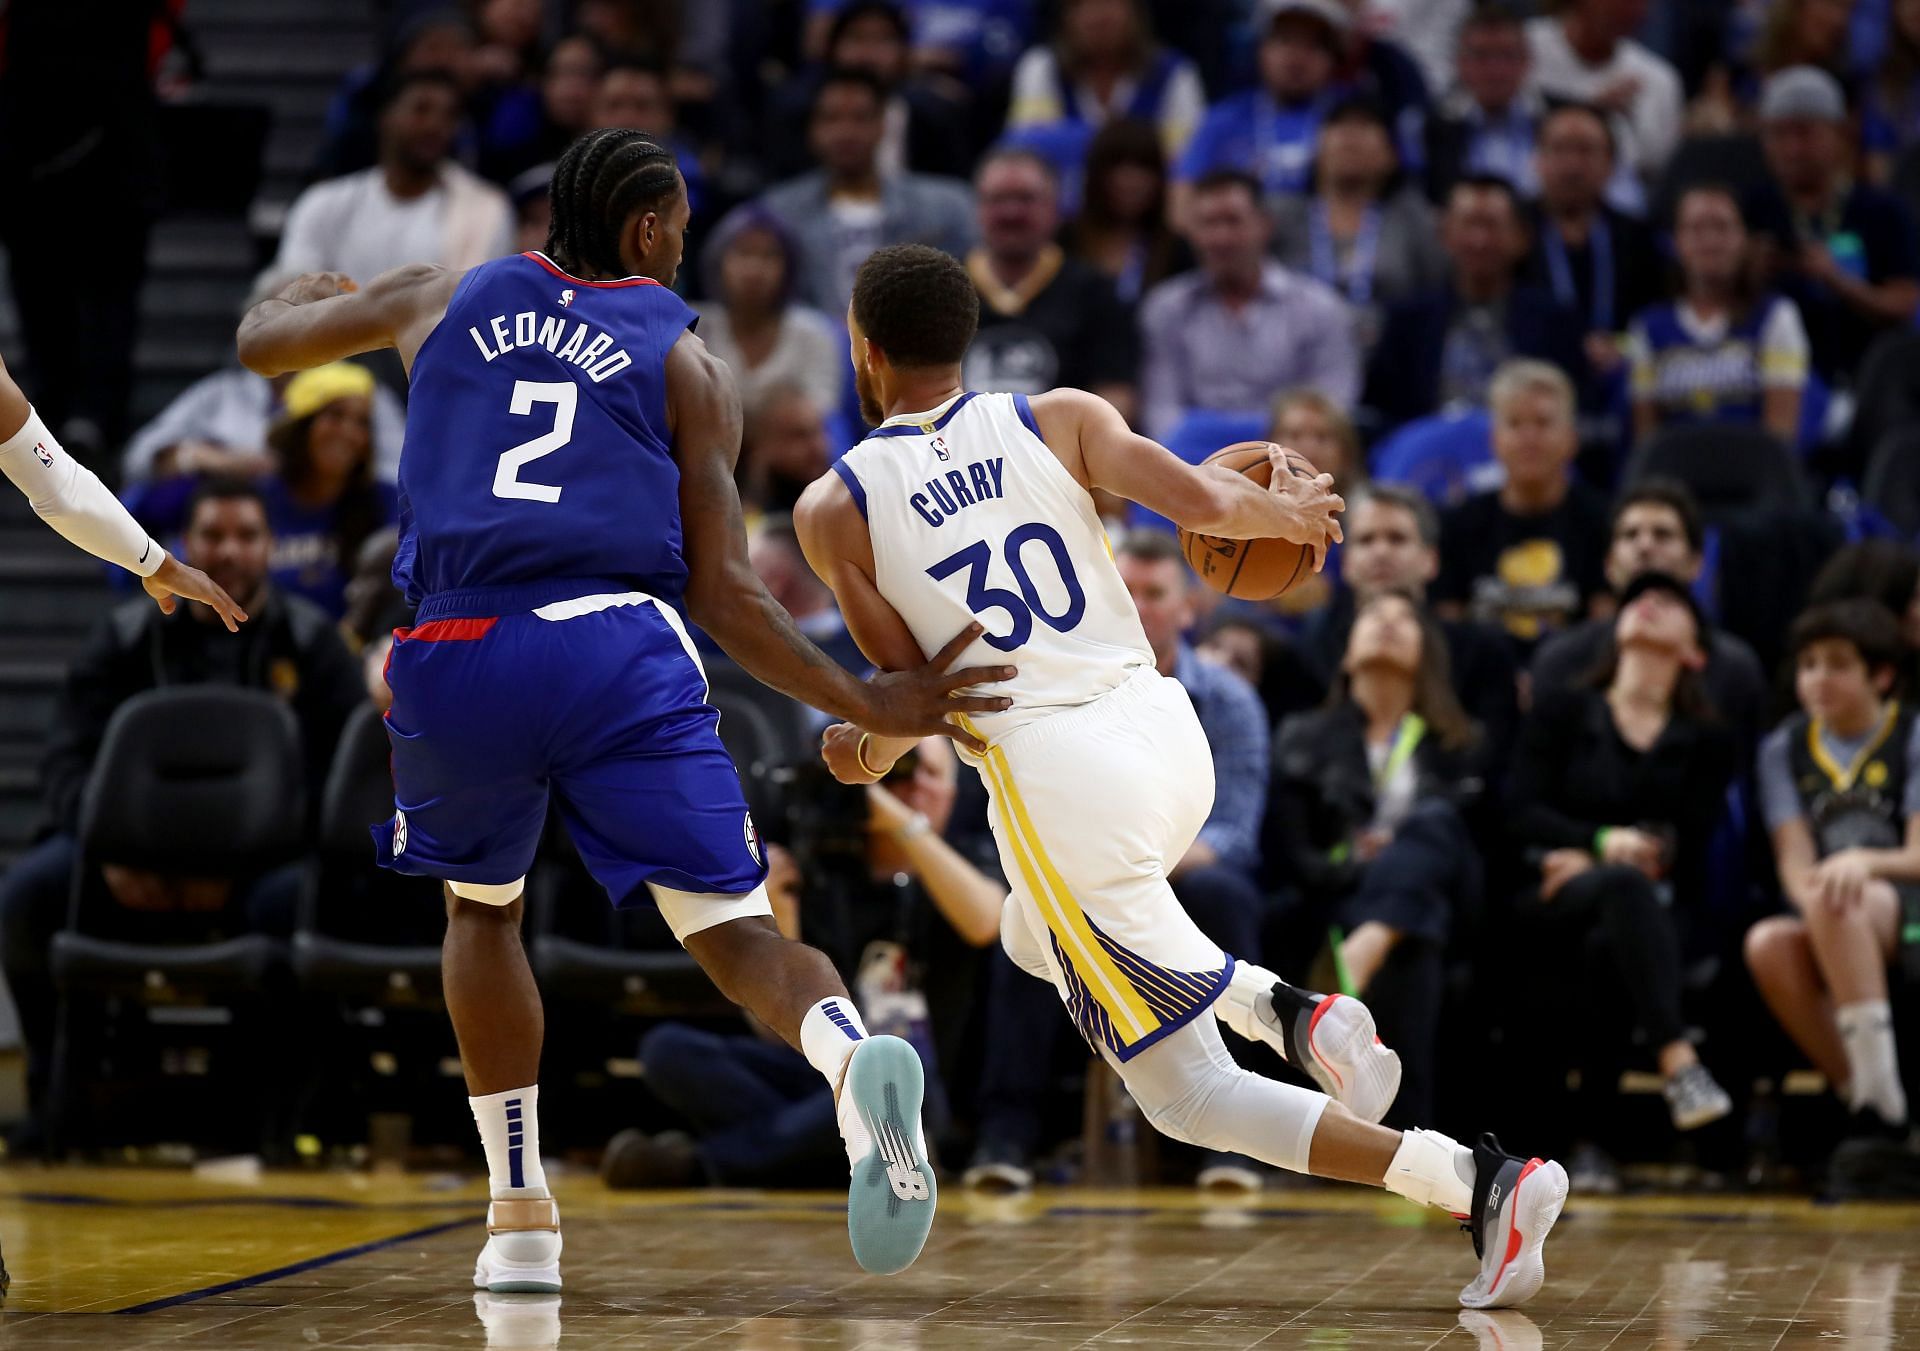 The Golden State Warriors will host the LA Clippers at Chase Center for their first home game of the season